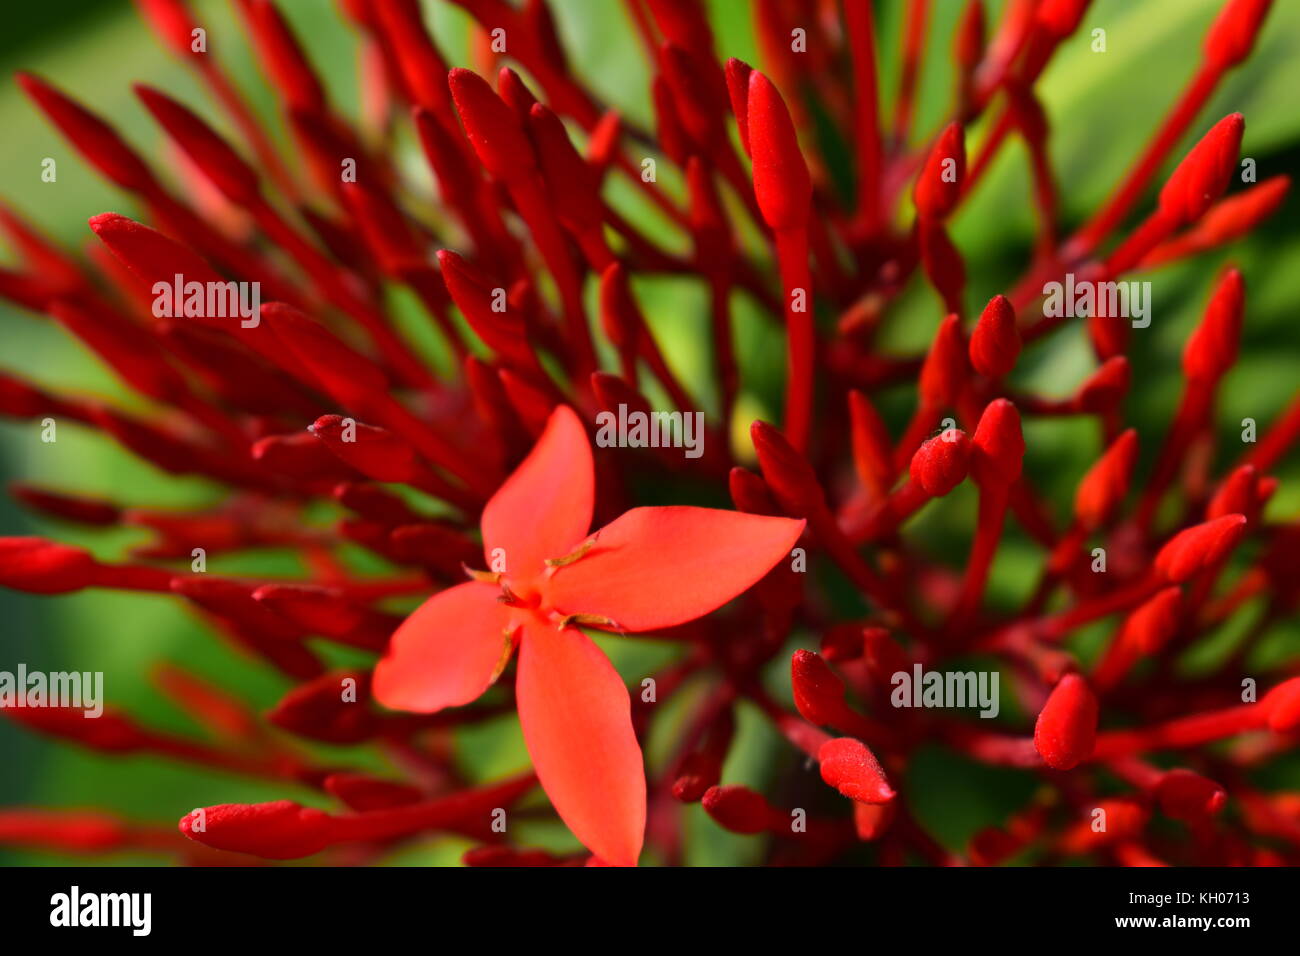 Closeup of Ixora coccinea flower buds with one bud in full bloom. Stock Photo